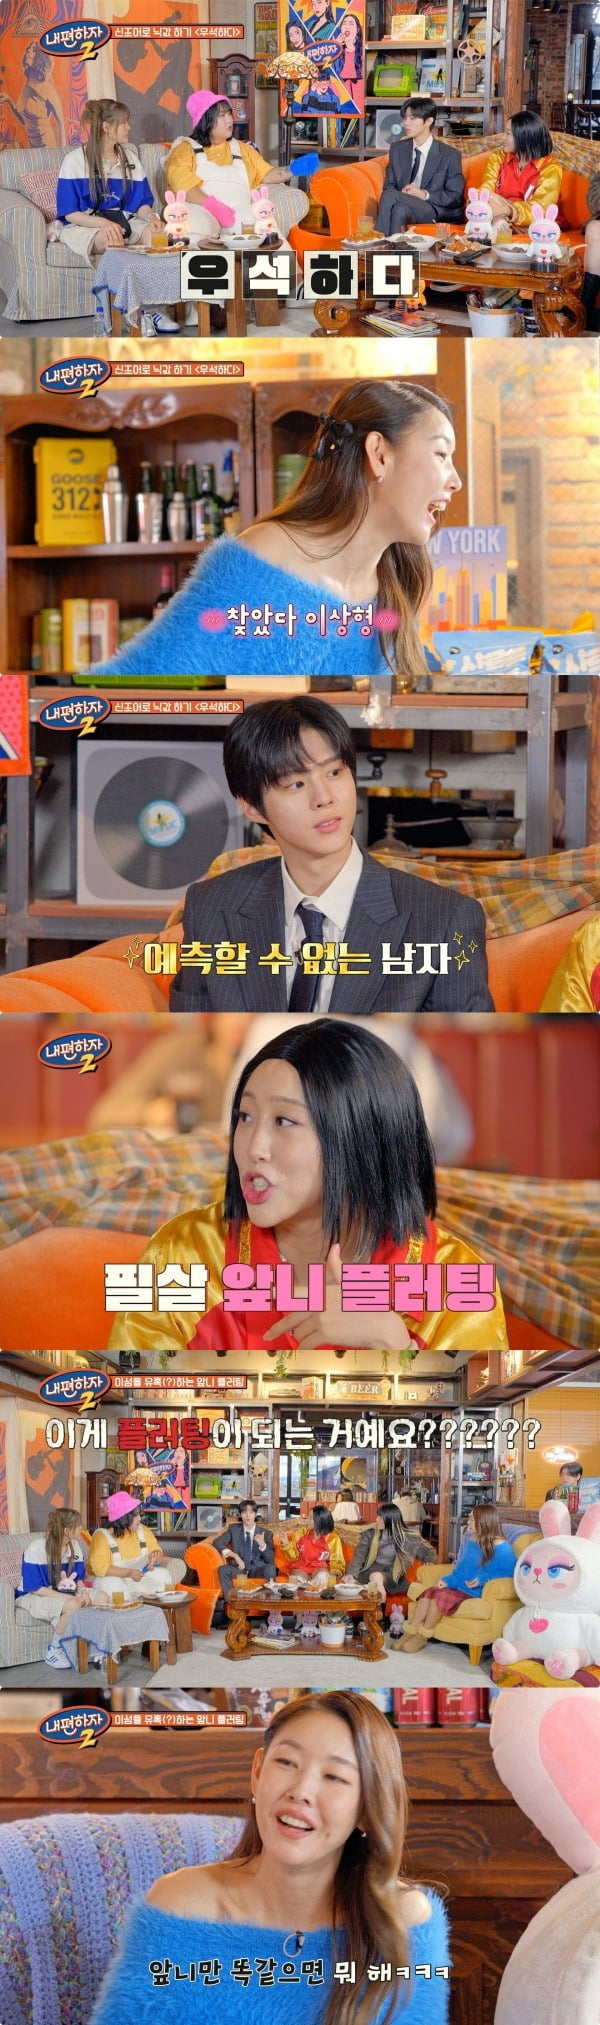 Han Hye-jin says Kim Woo-seok, 13 years younger than her, “is the man I want”